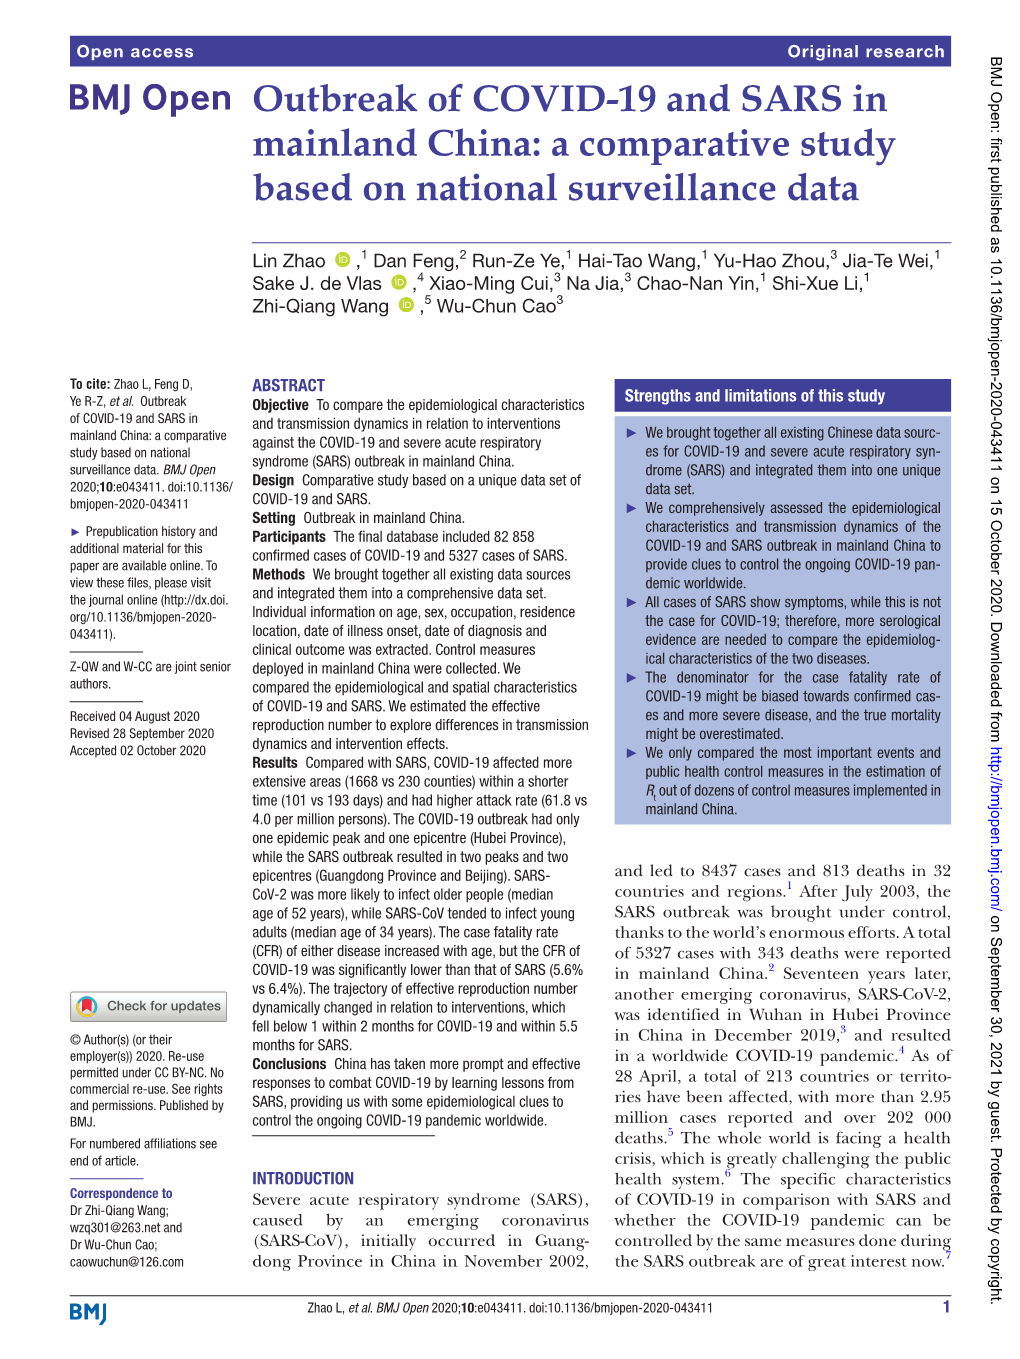 Outbreak of COVID-19 and SARS in Mainland China: a Comparative Study Based on National Surveillance Data